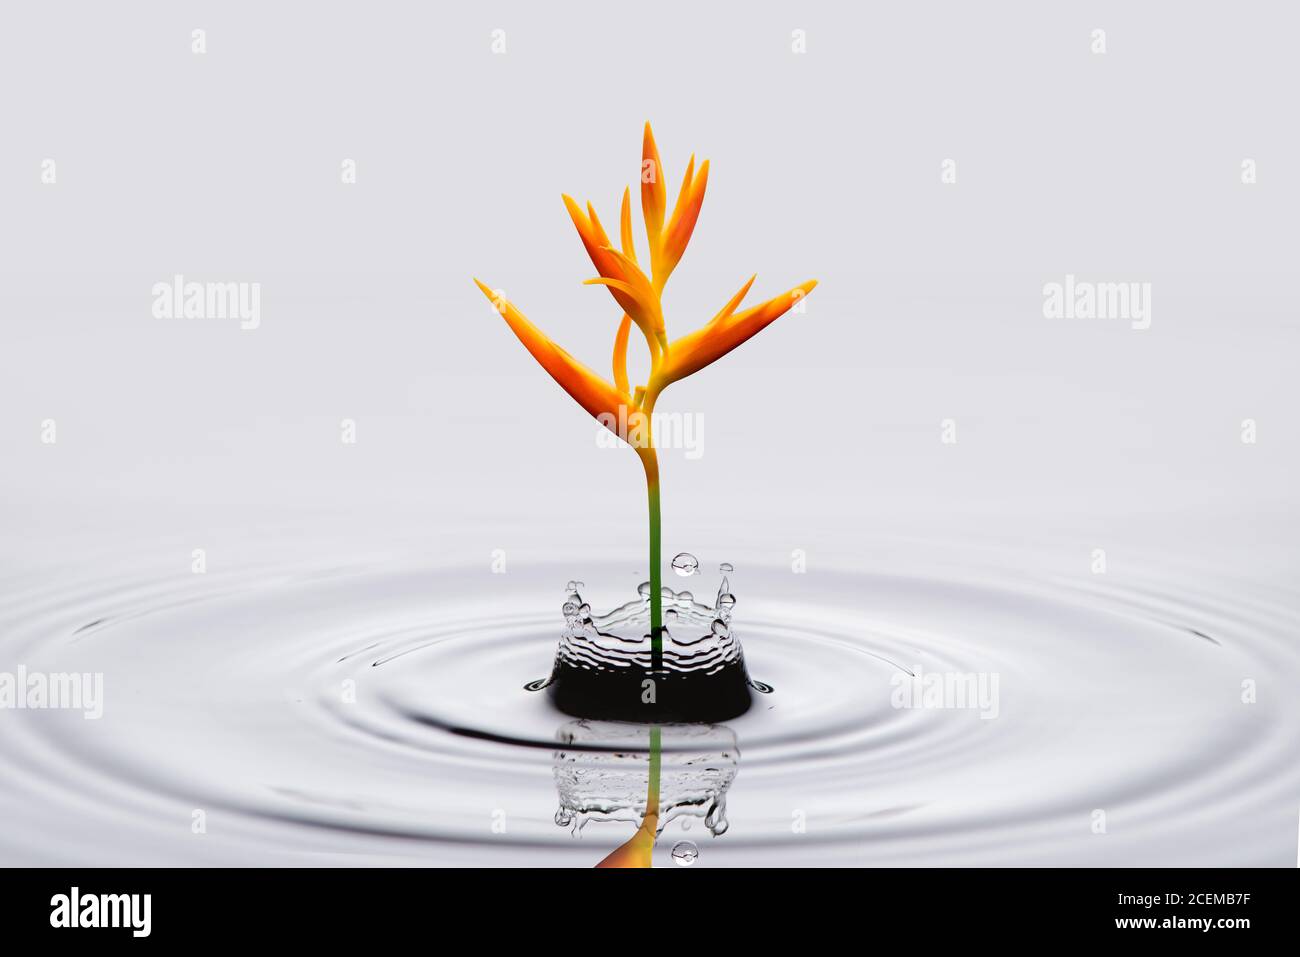 Heliconia psittacorum (Golden Torch) flowers, tropical flowers in water splash isolated on white background. Stock Photo